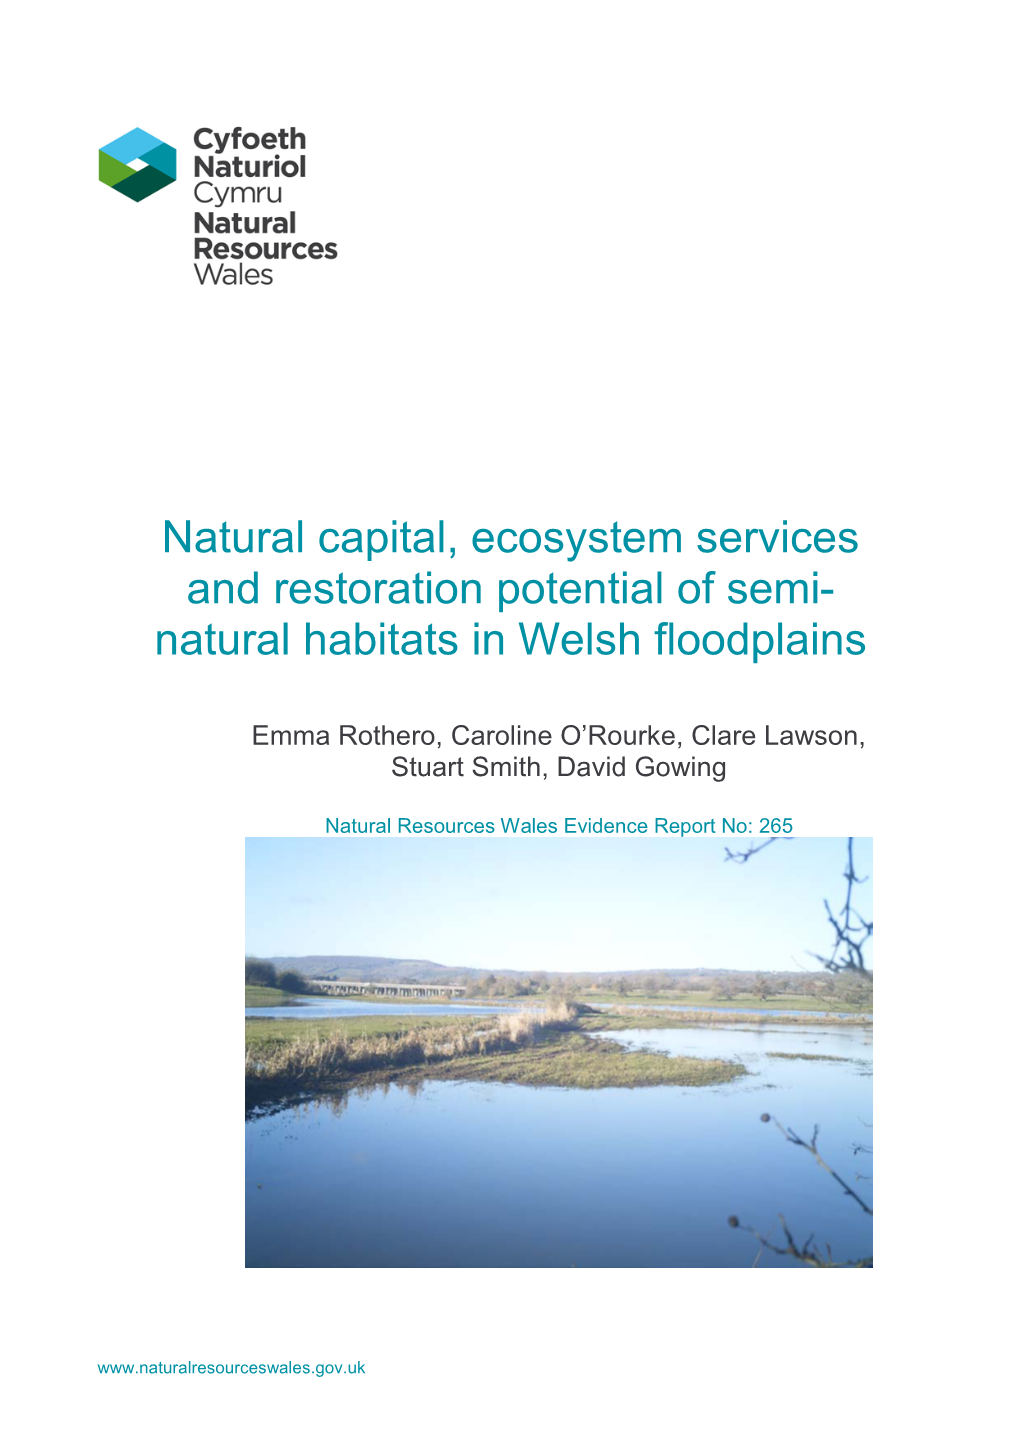 Natural Capital, Ecosystem Services and Restoration Potential of Semi- Natural Habitats in Welsh Floodplains